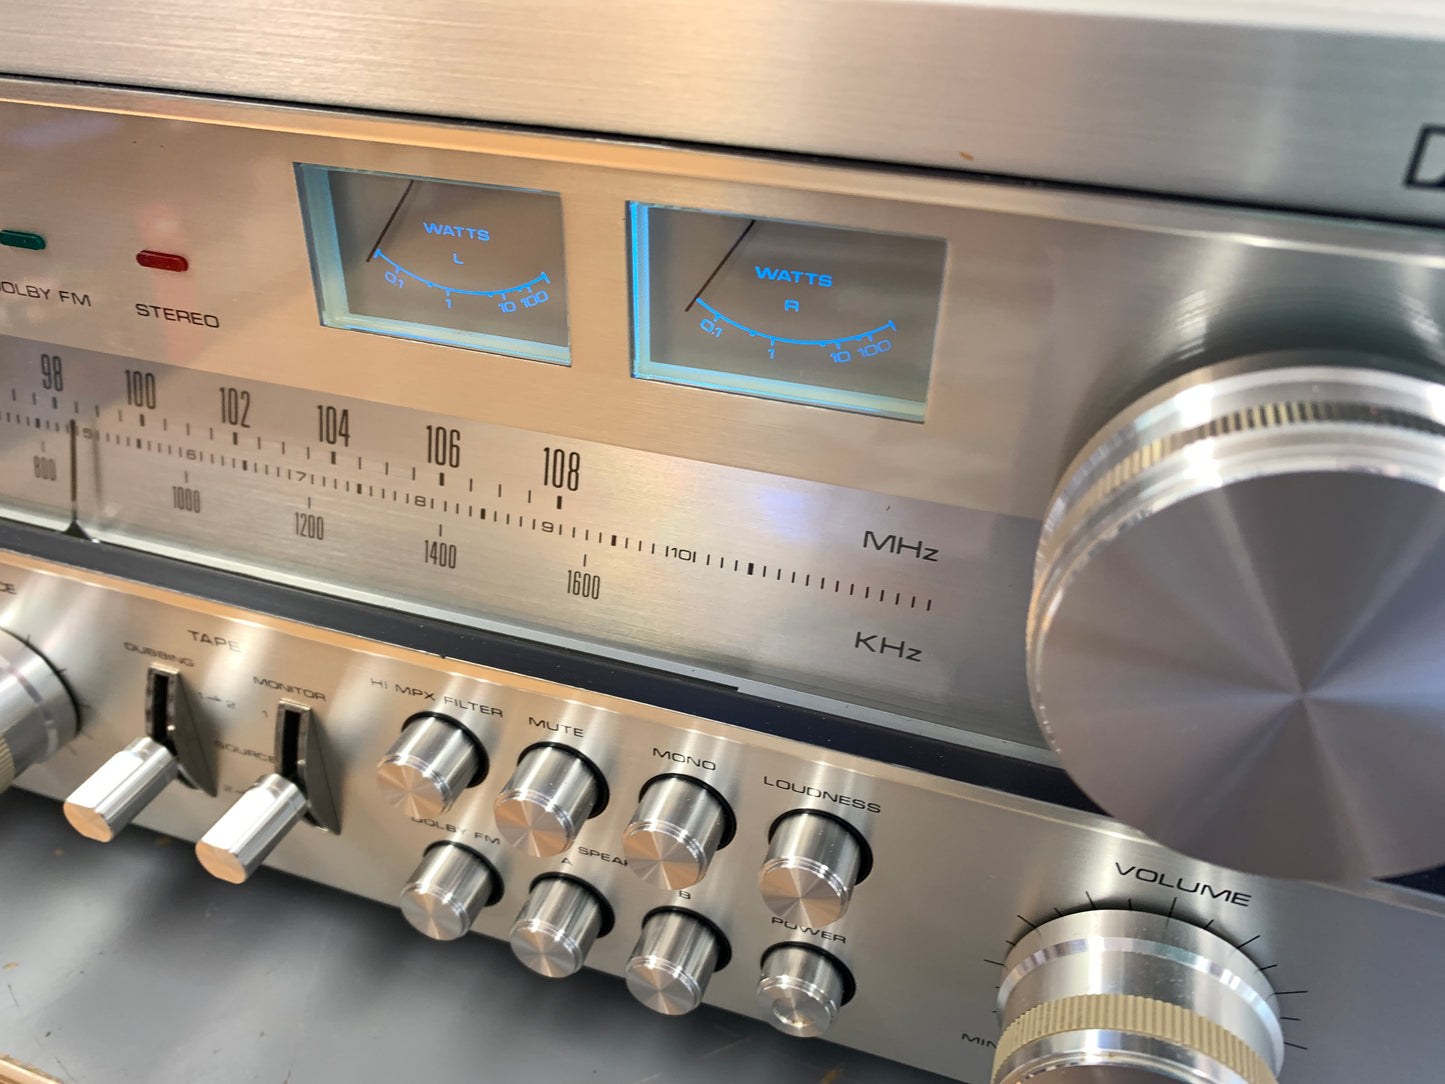 Realistic STA-2000D Stereo Receiver